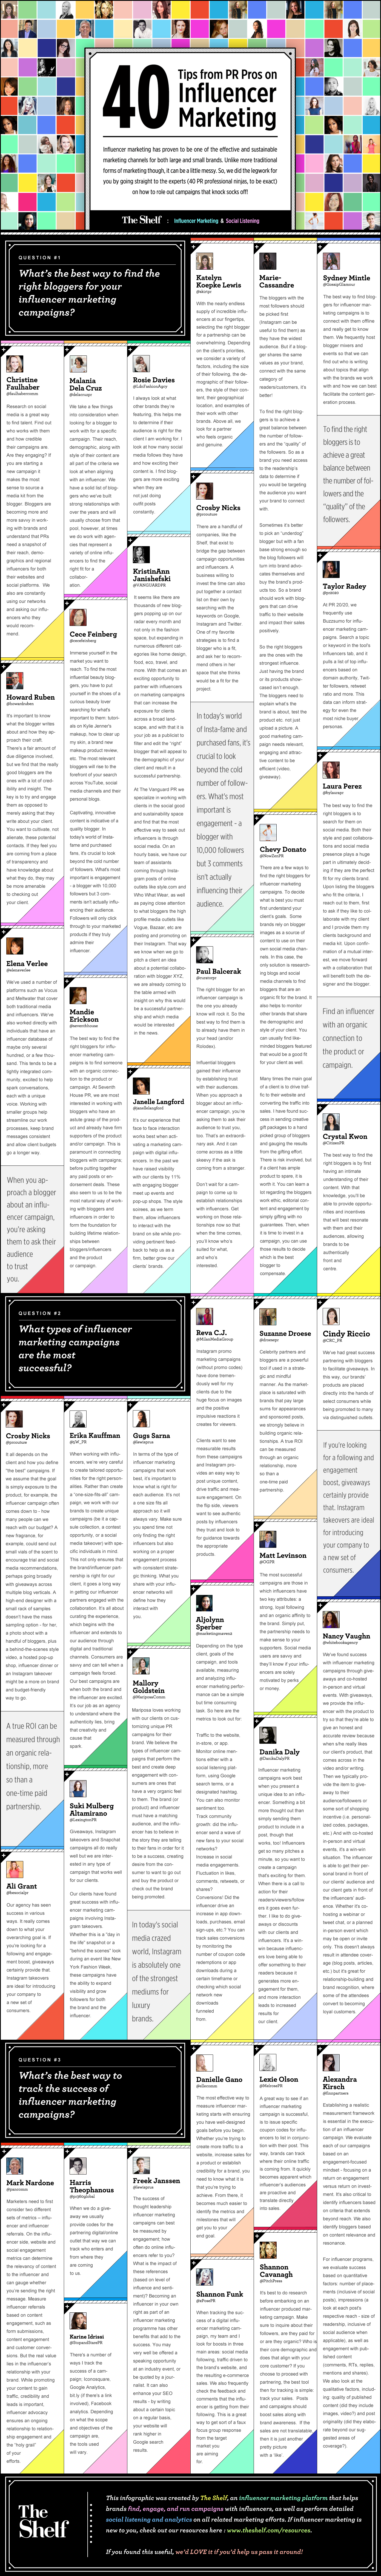 Infographic of influencer marketing advice from PR experts